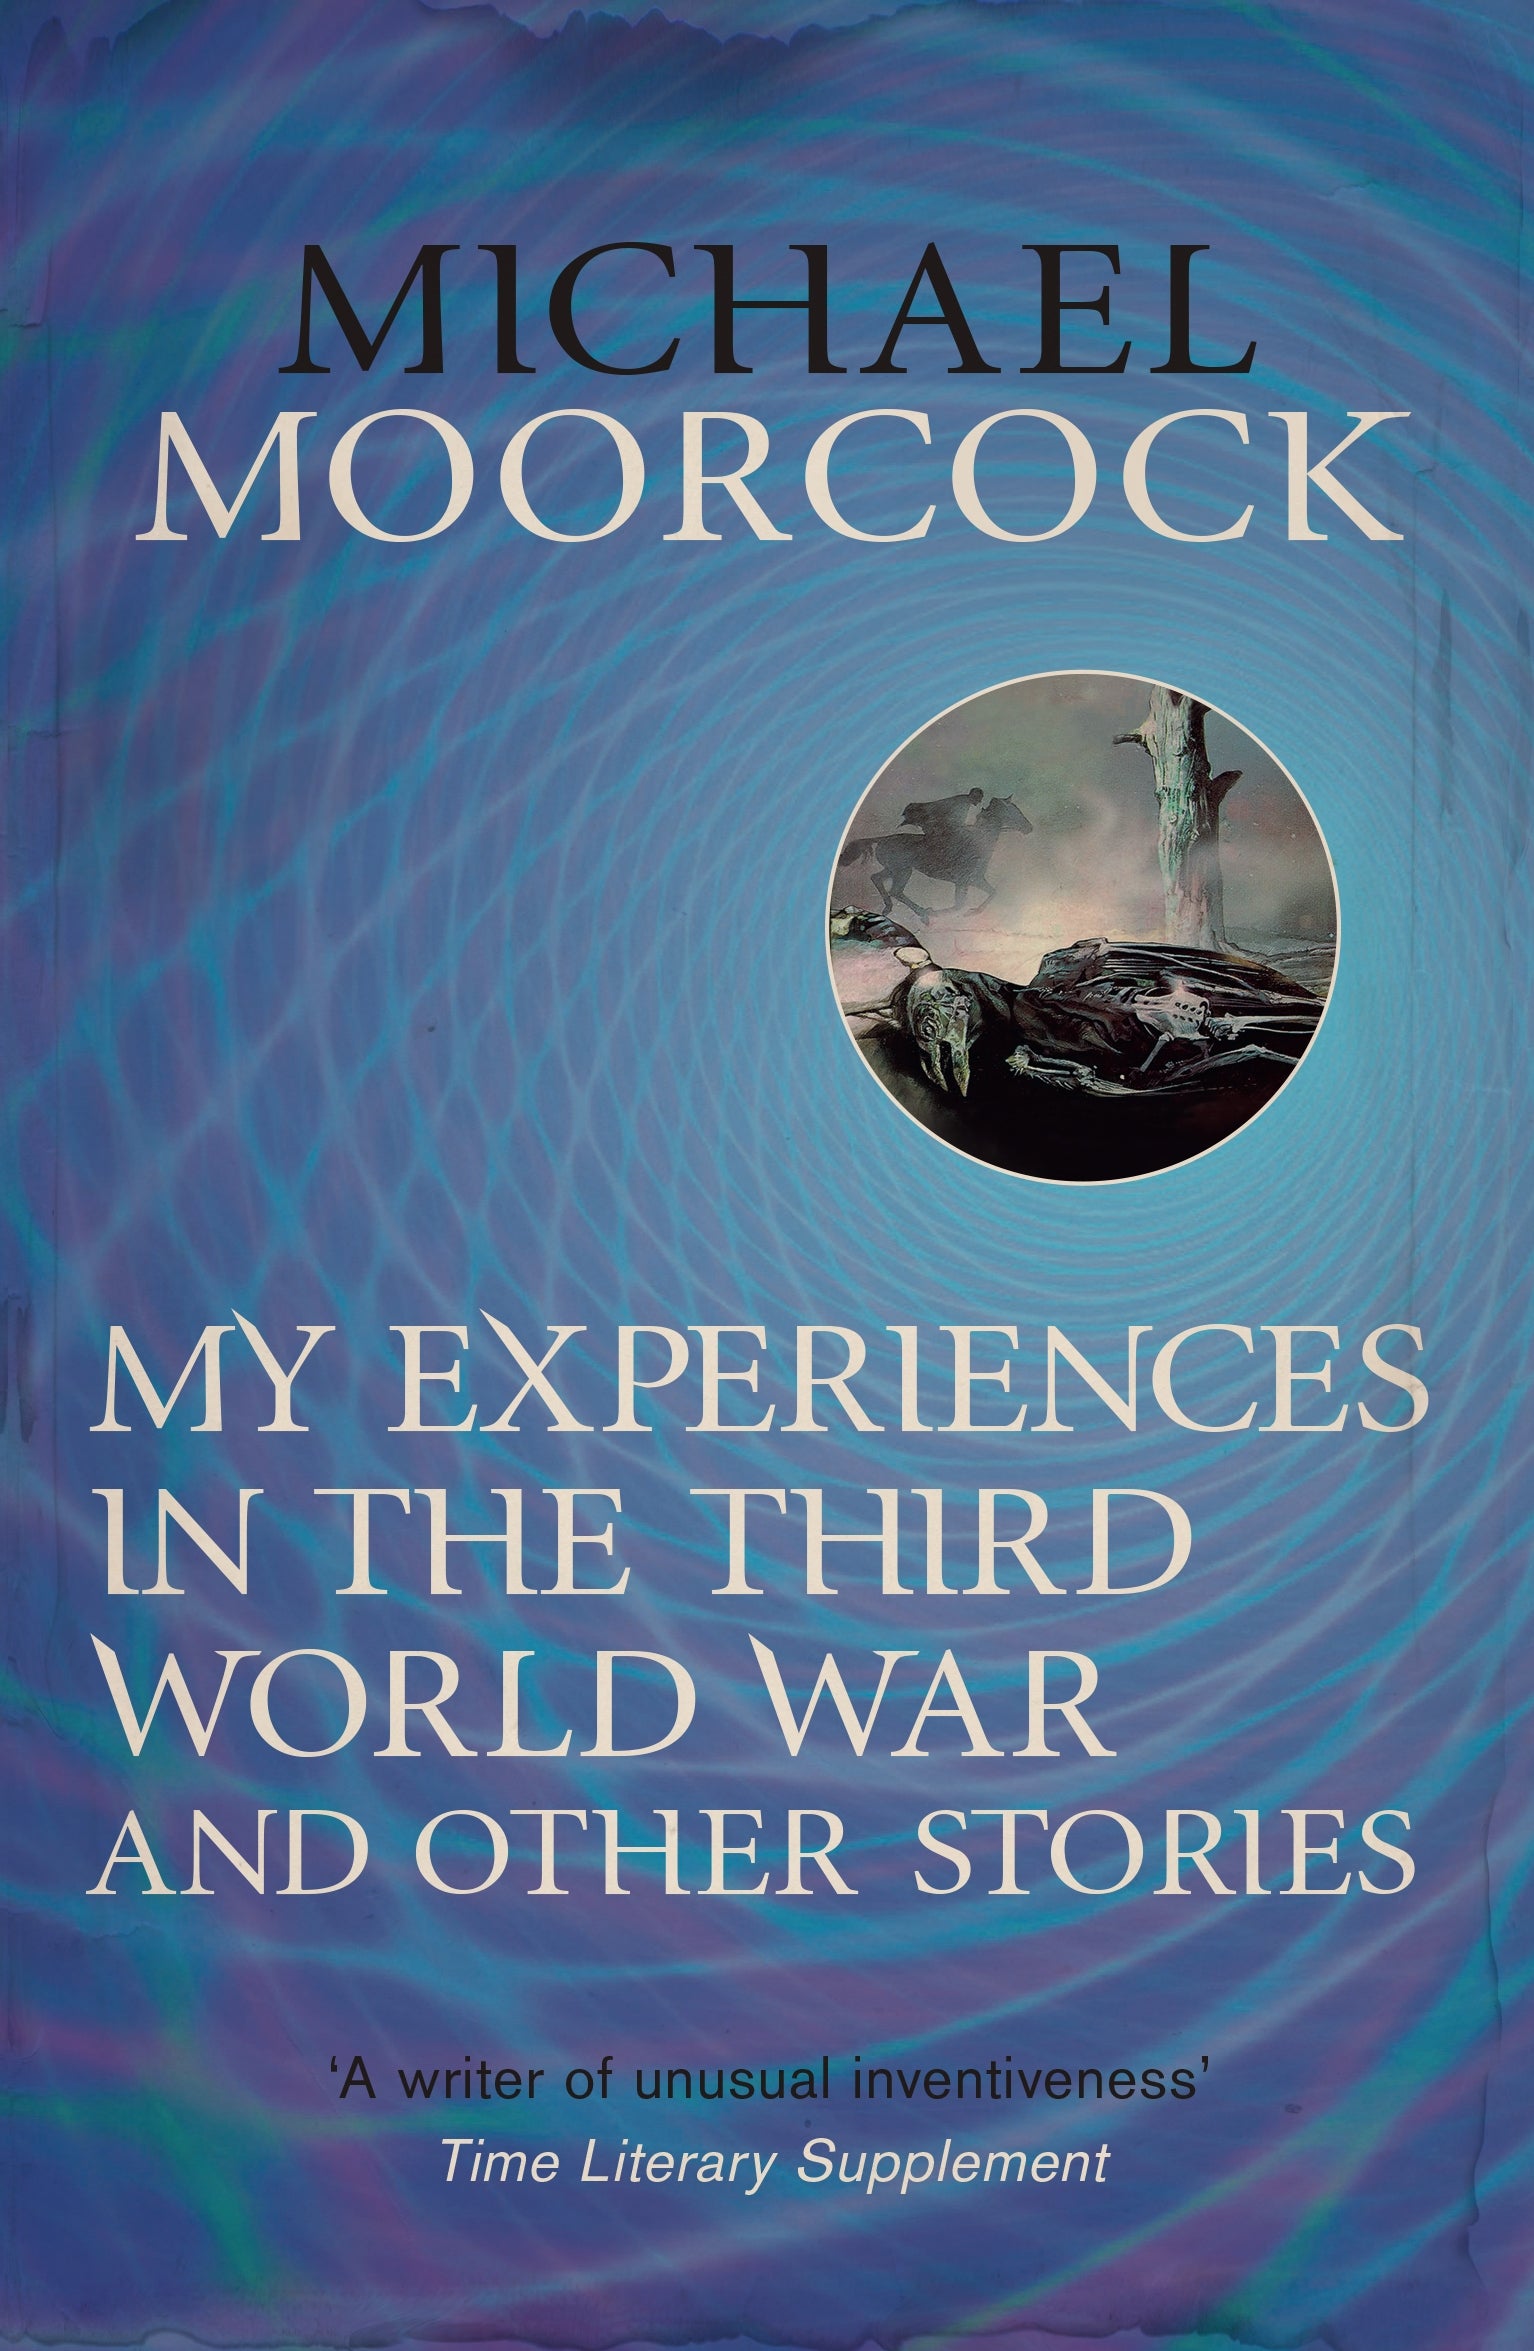 My Experiences in the Third World War and Other Stories by Michael Moorcock